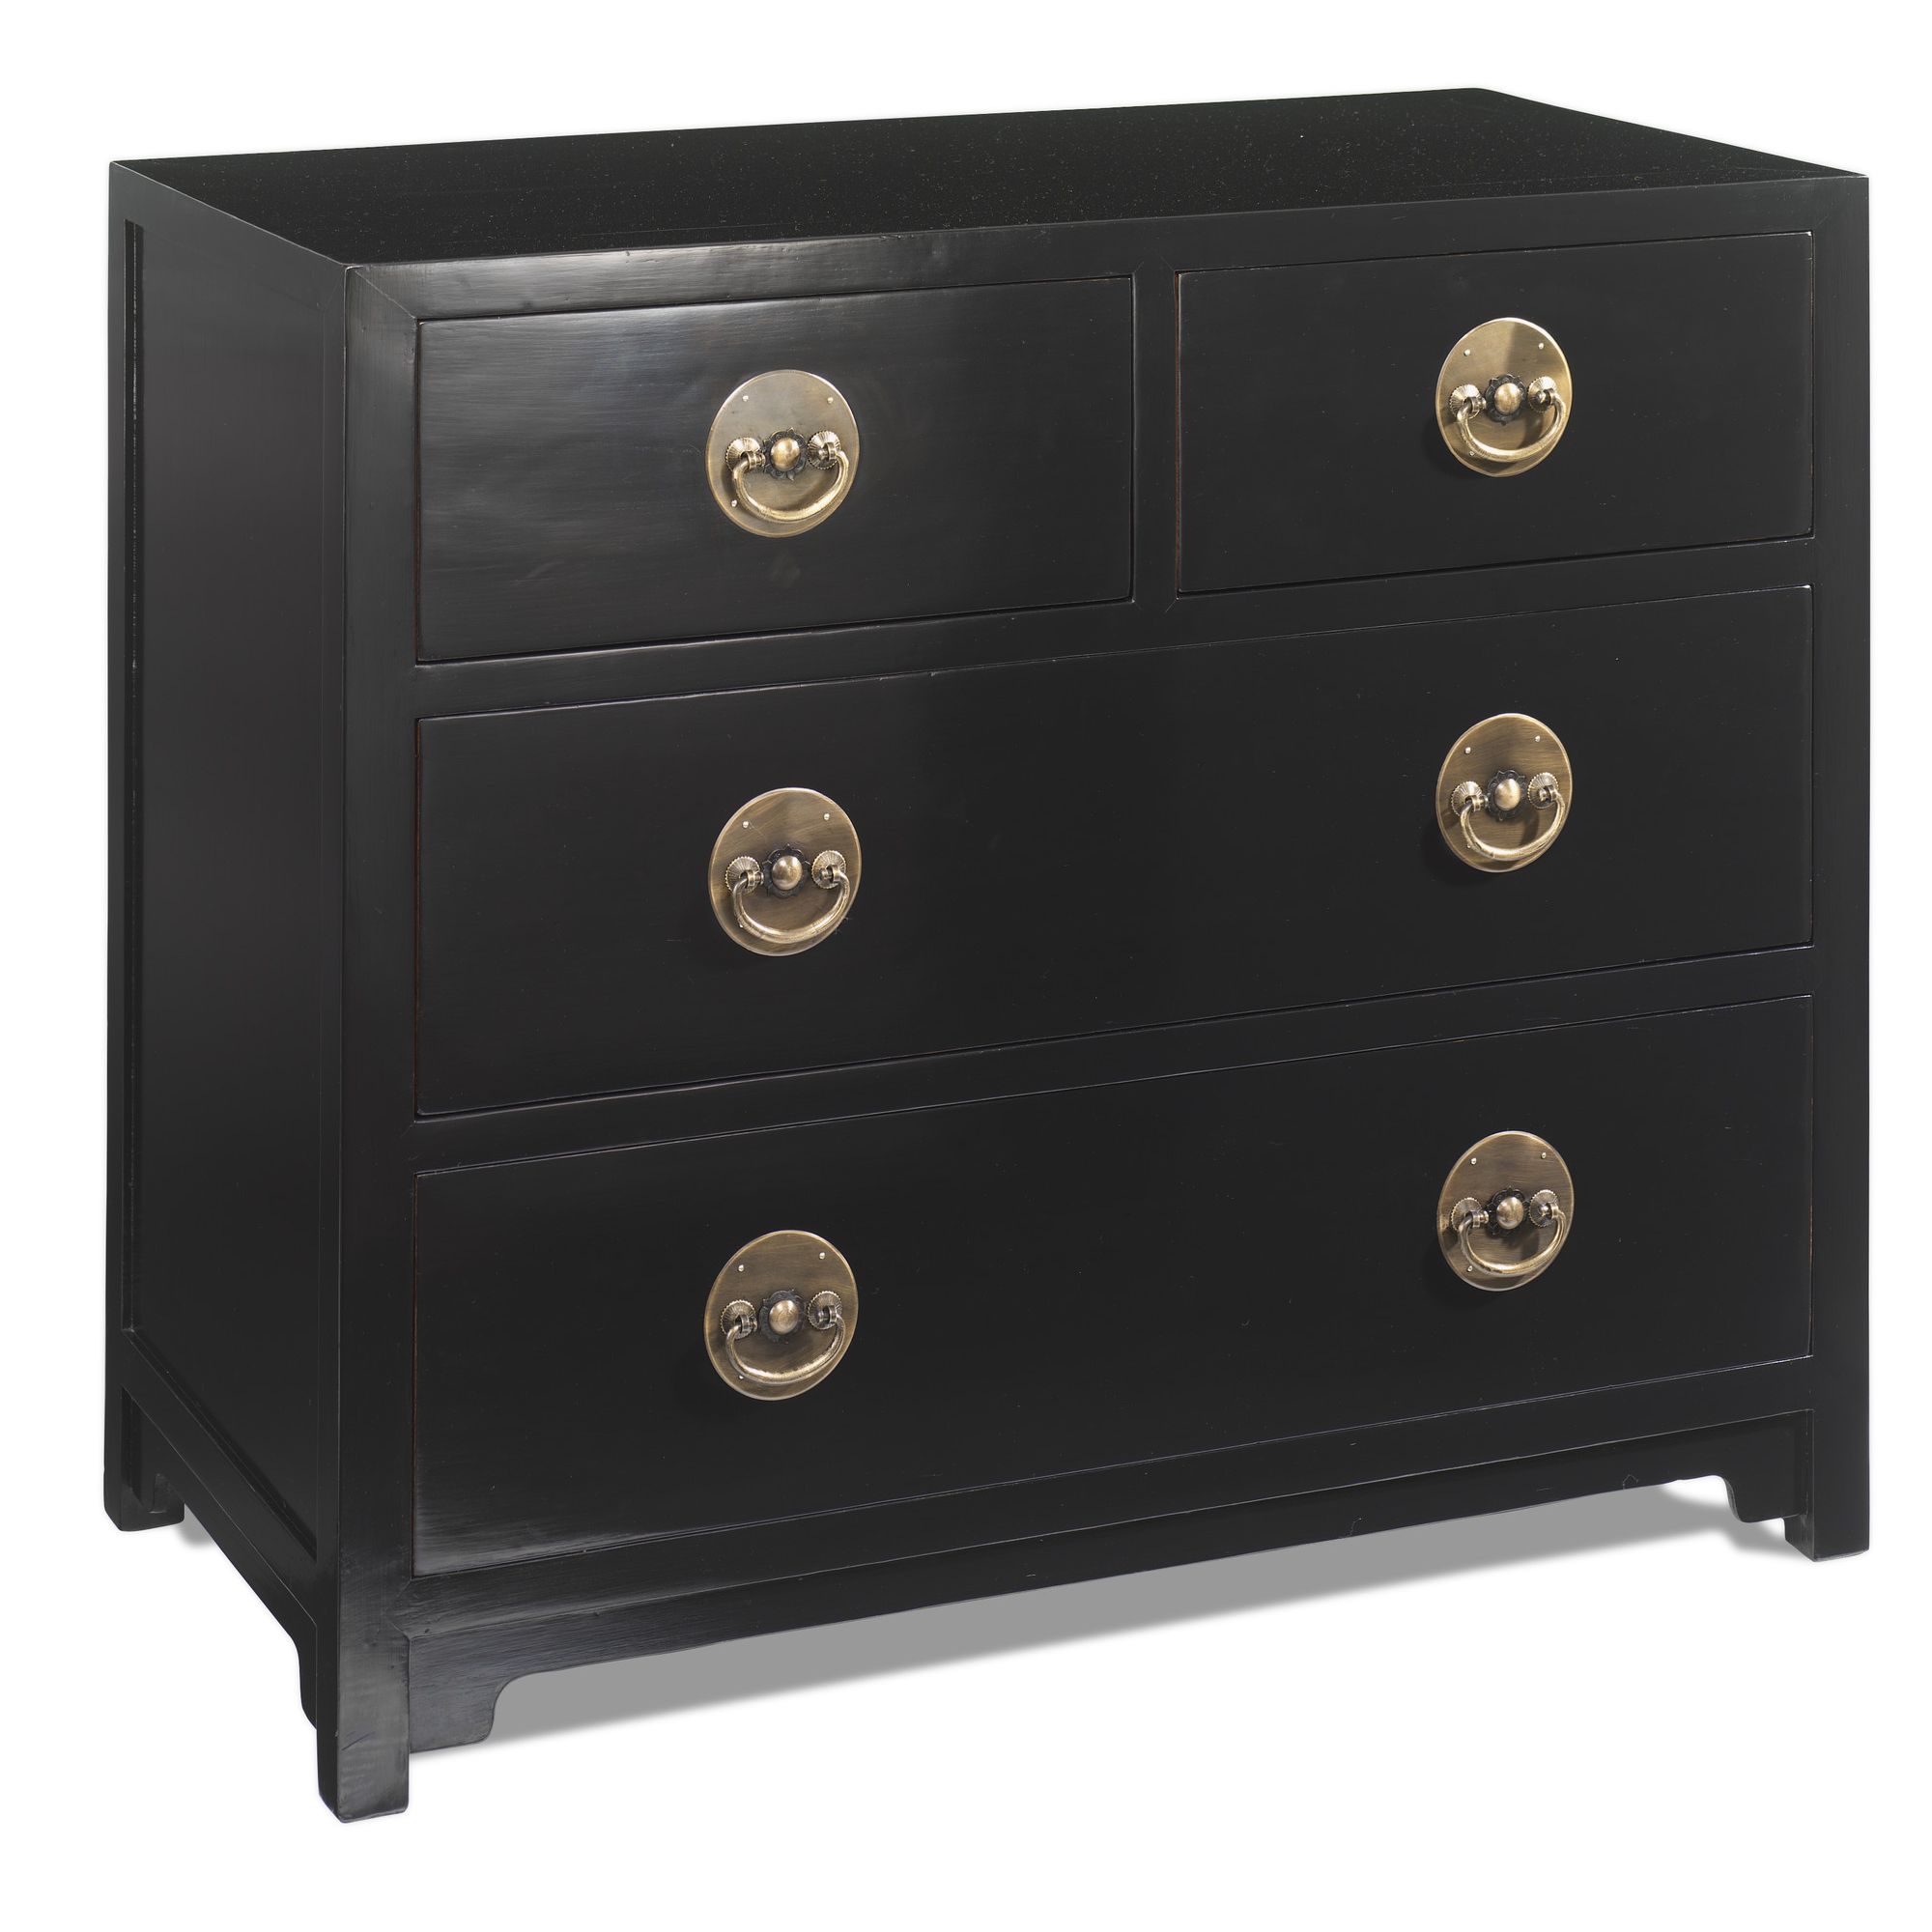 Shimu Chinese Classical Large Chest of Drawers - Black Lacquer at Tesco Direct